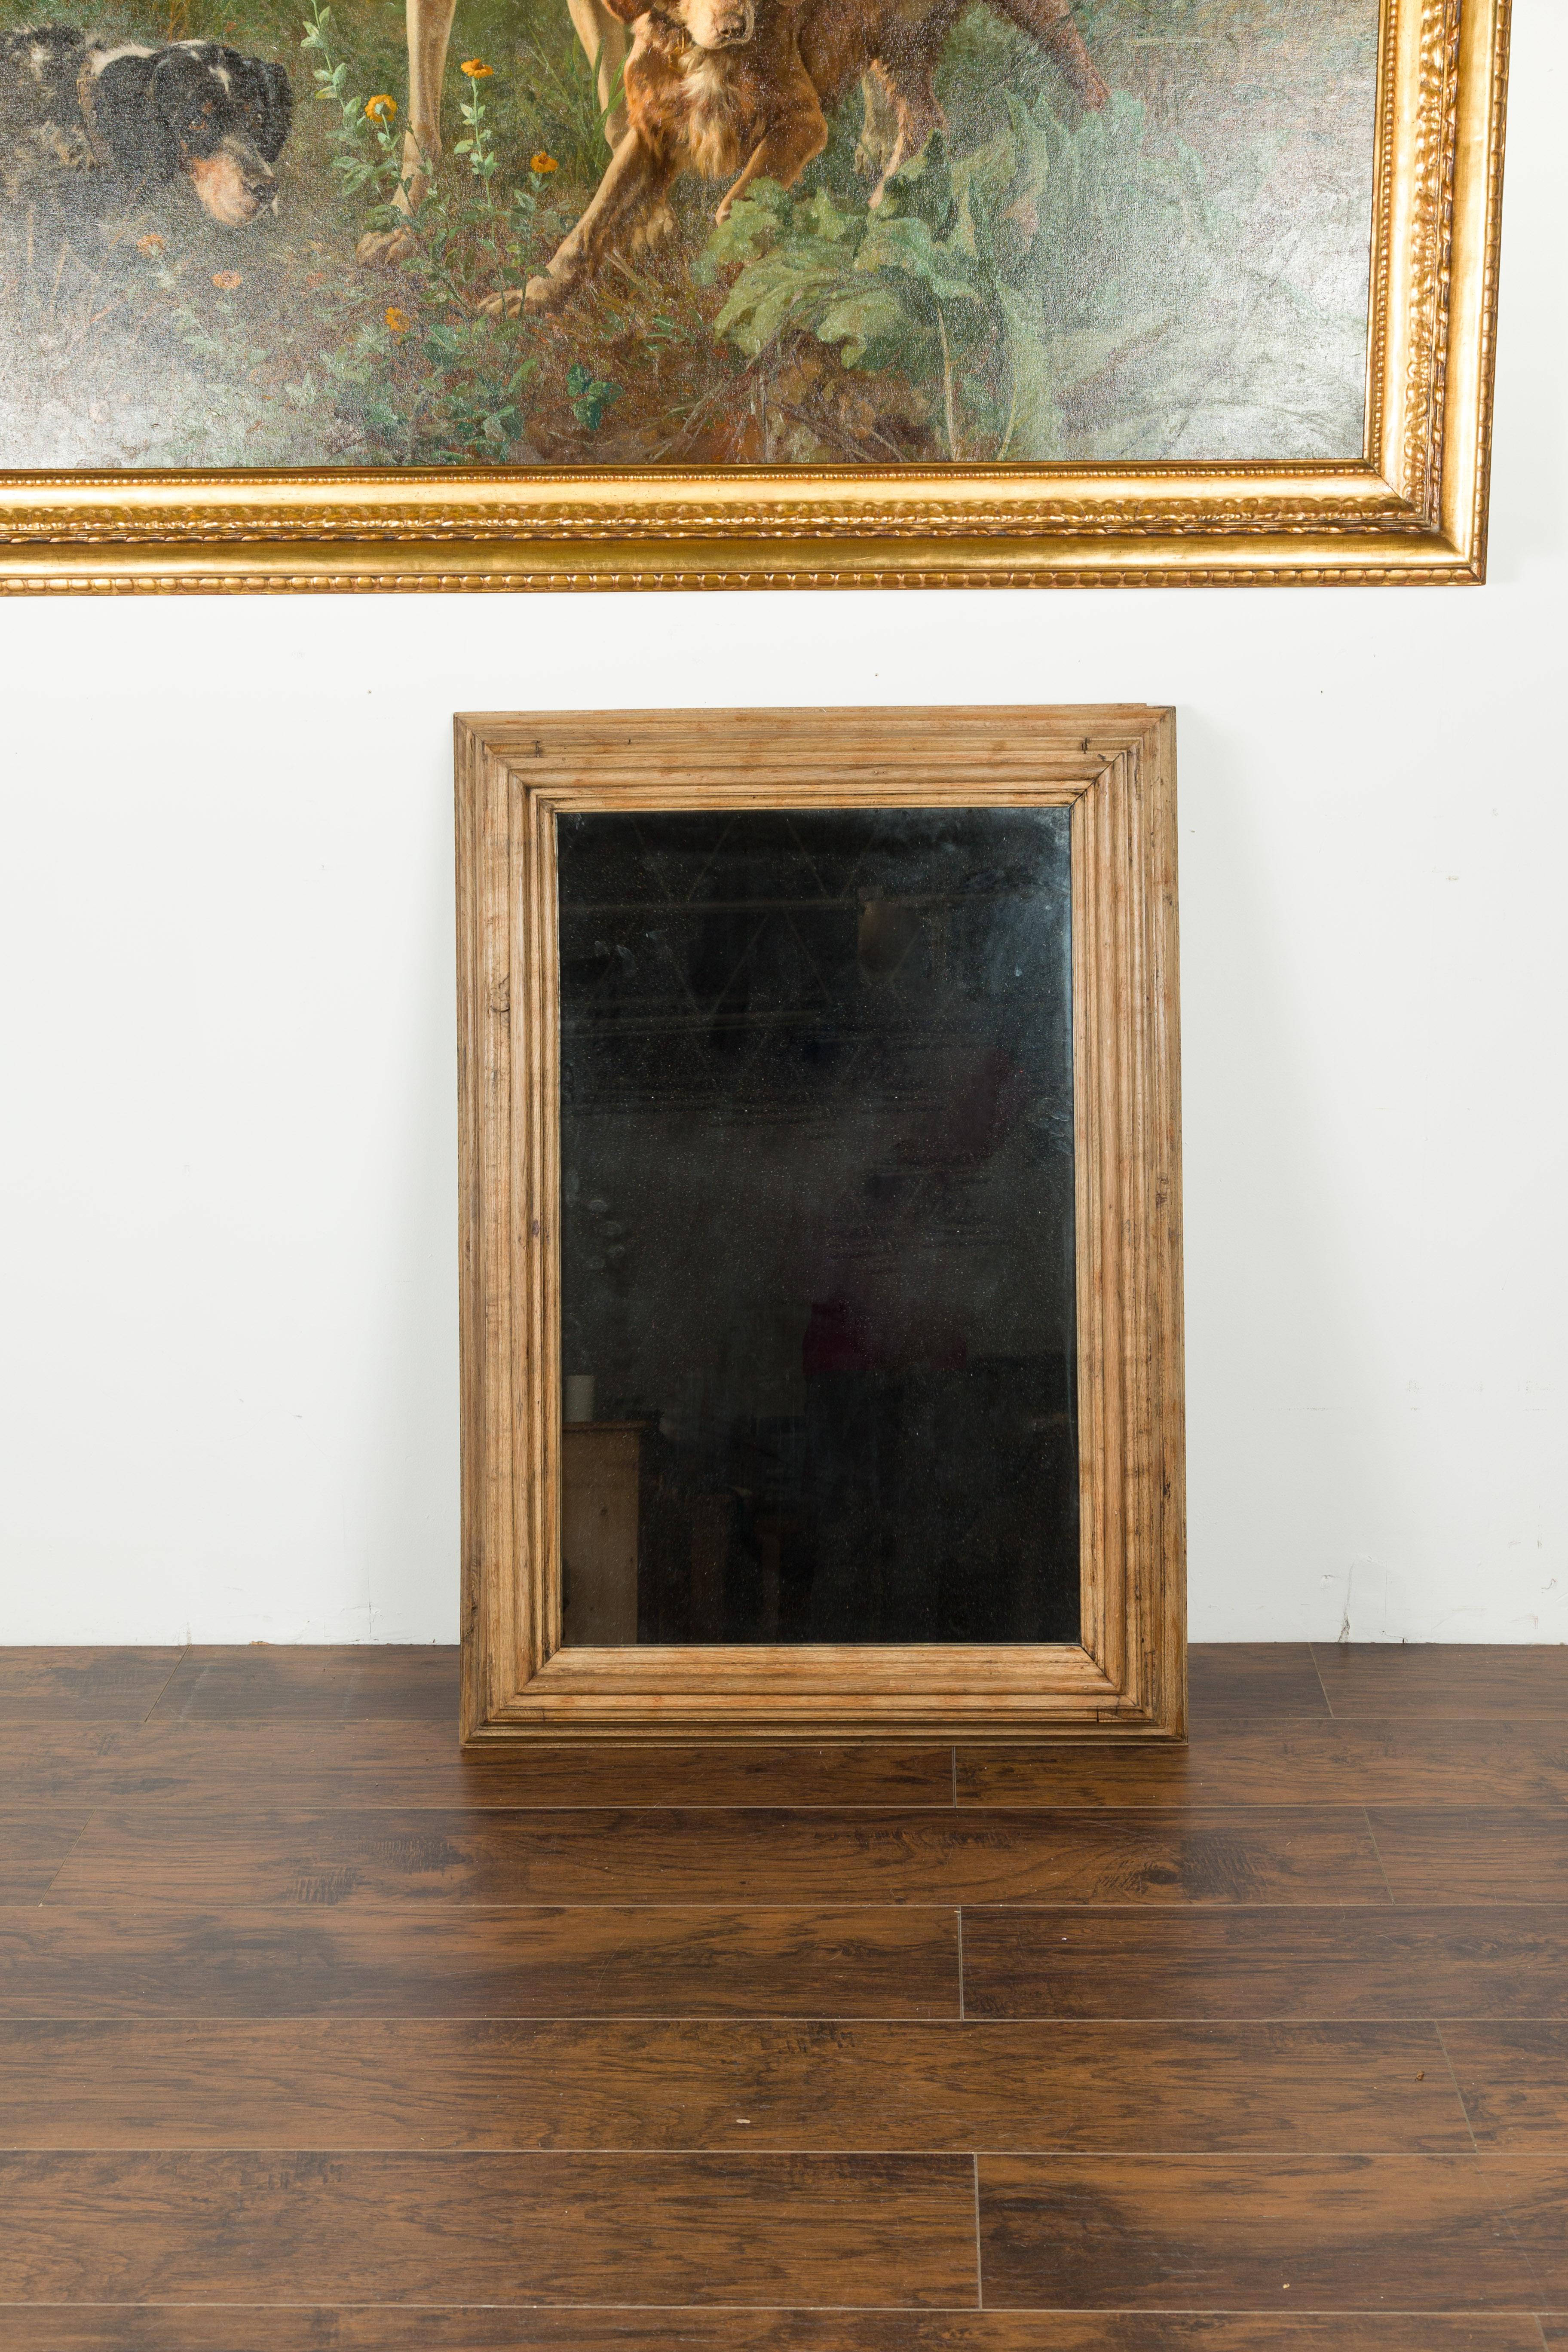 An English rustic oak mirror from the late 19th century, with molded frame. Created in England during the last quarter of the 19th century, this oak mirror charms us with its natural finish and molded frame, surrounding a clear mirror plate with